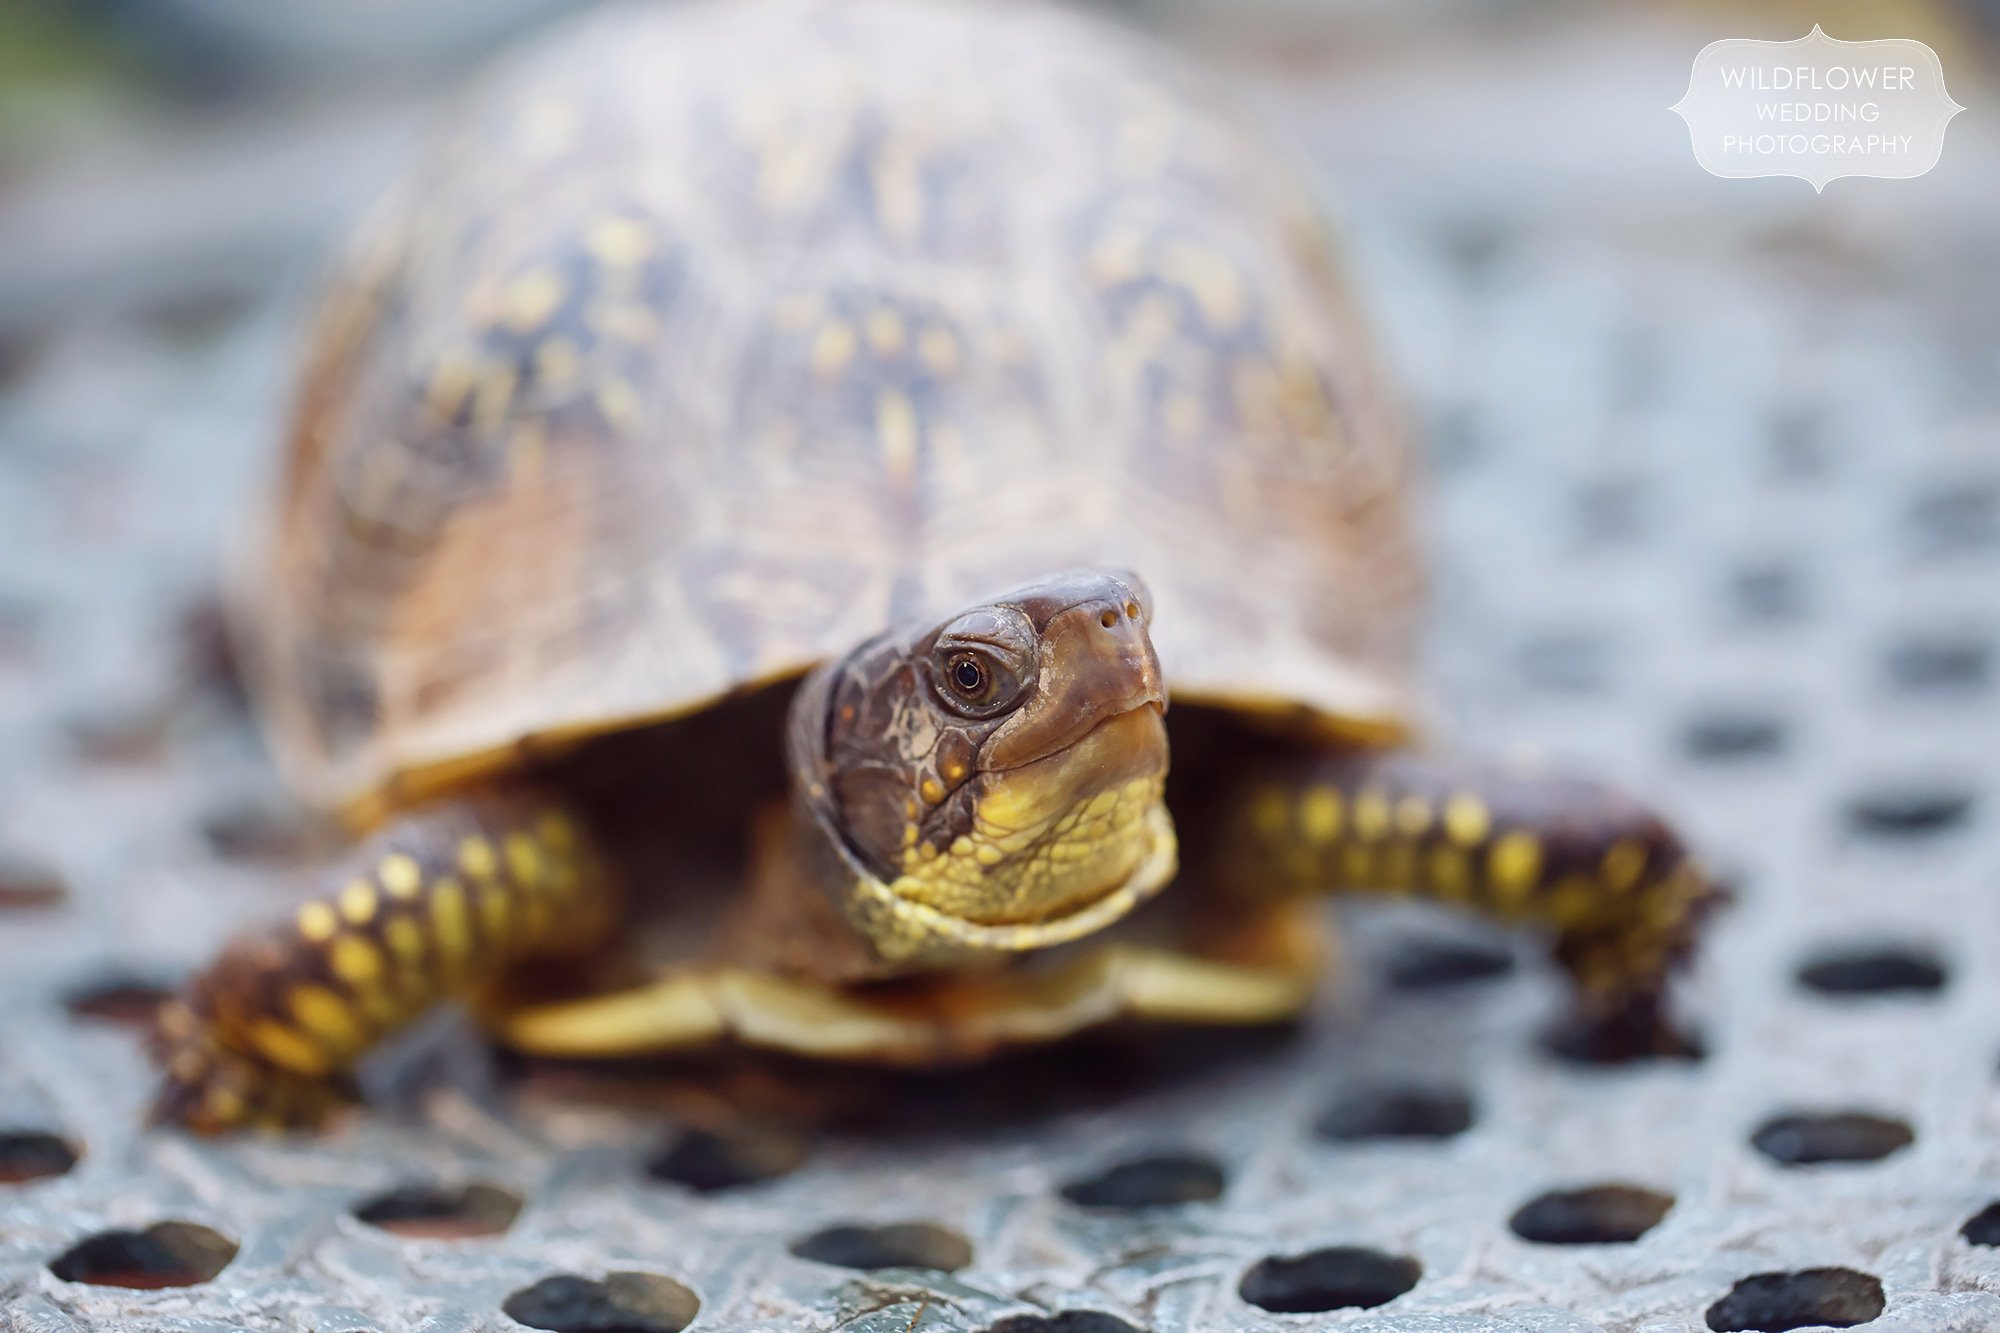 A box turtle was found at this backyard wedding reception in St. Louis.